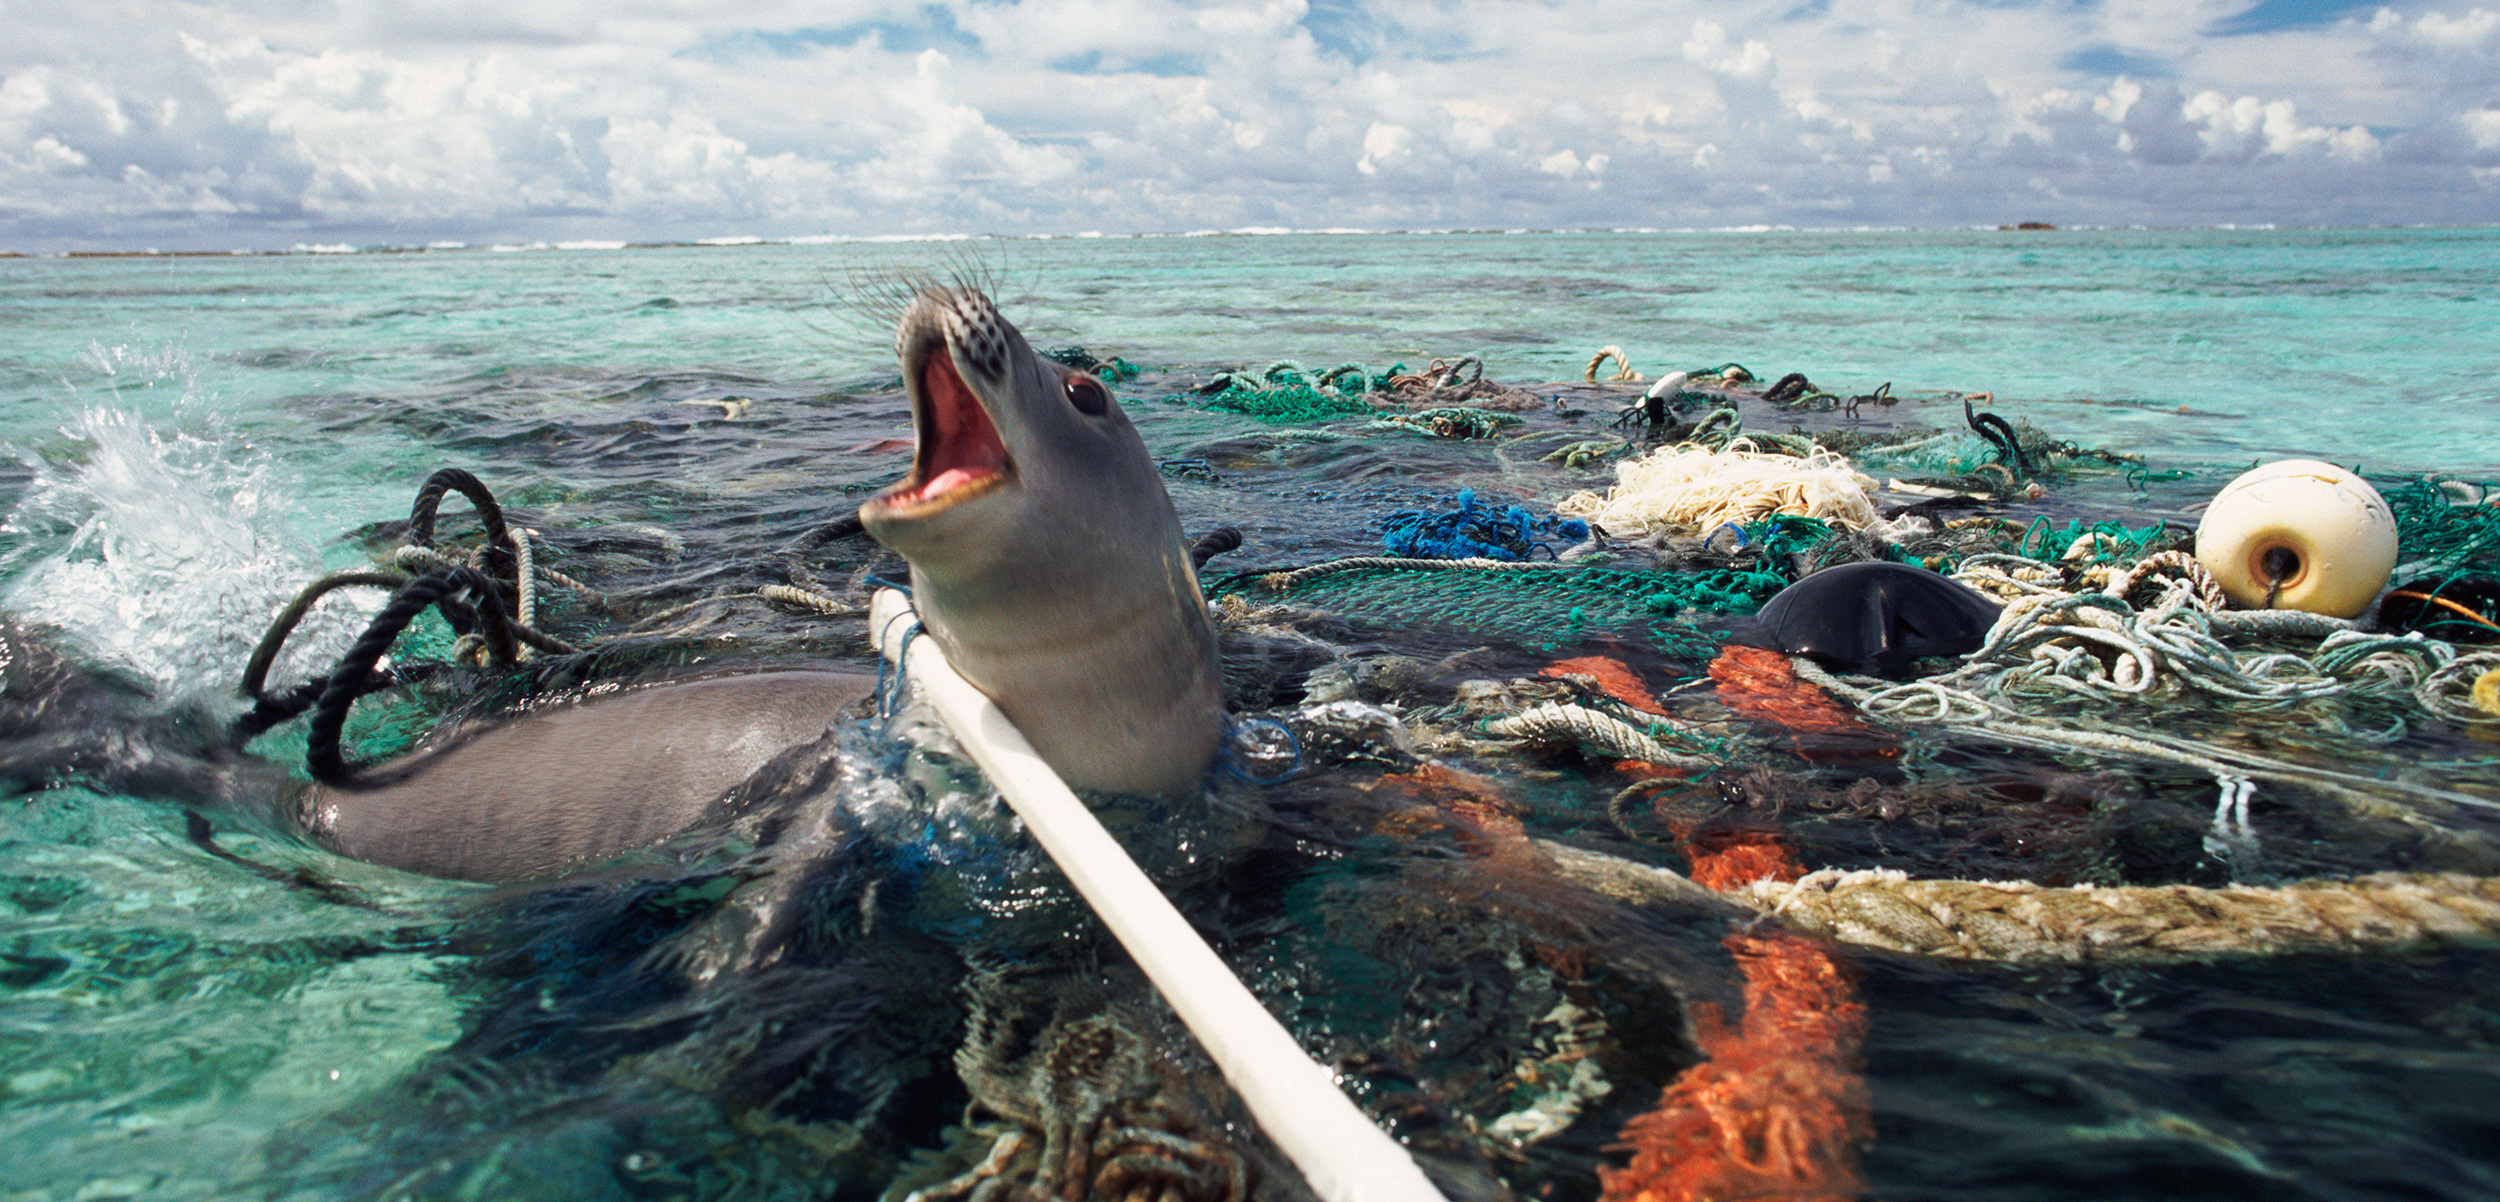 After snapping this photo in the Kure Atoll in the Pacific, the photographer freed this monk seal caught in abandoned fishing tackle. Photo by Michael Pitts/naturepl.com